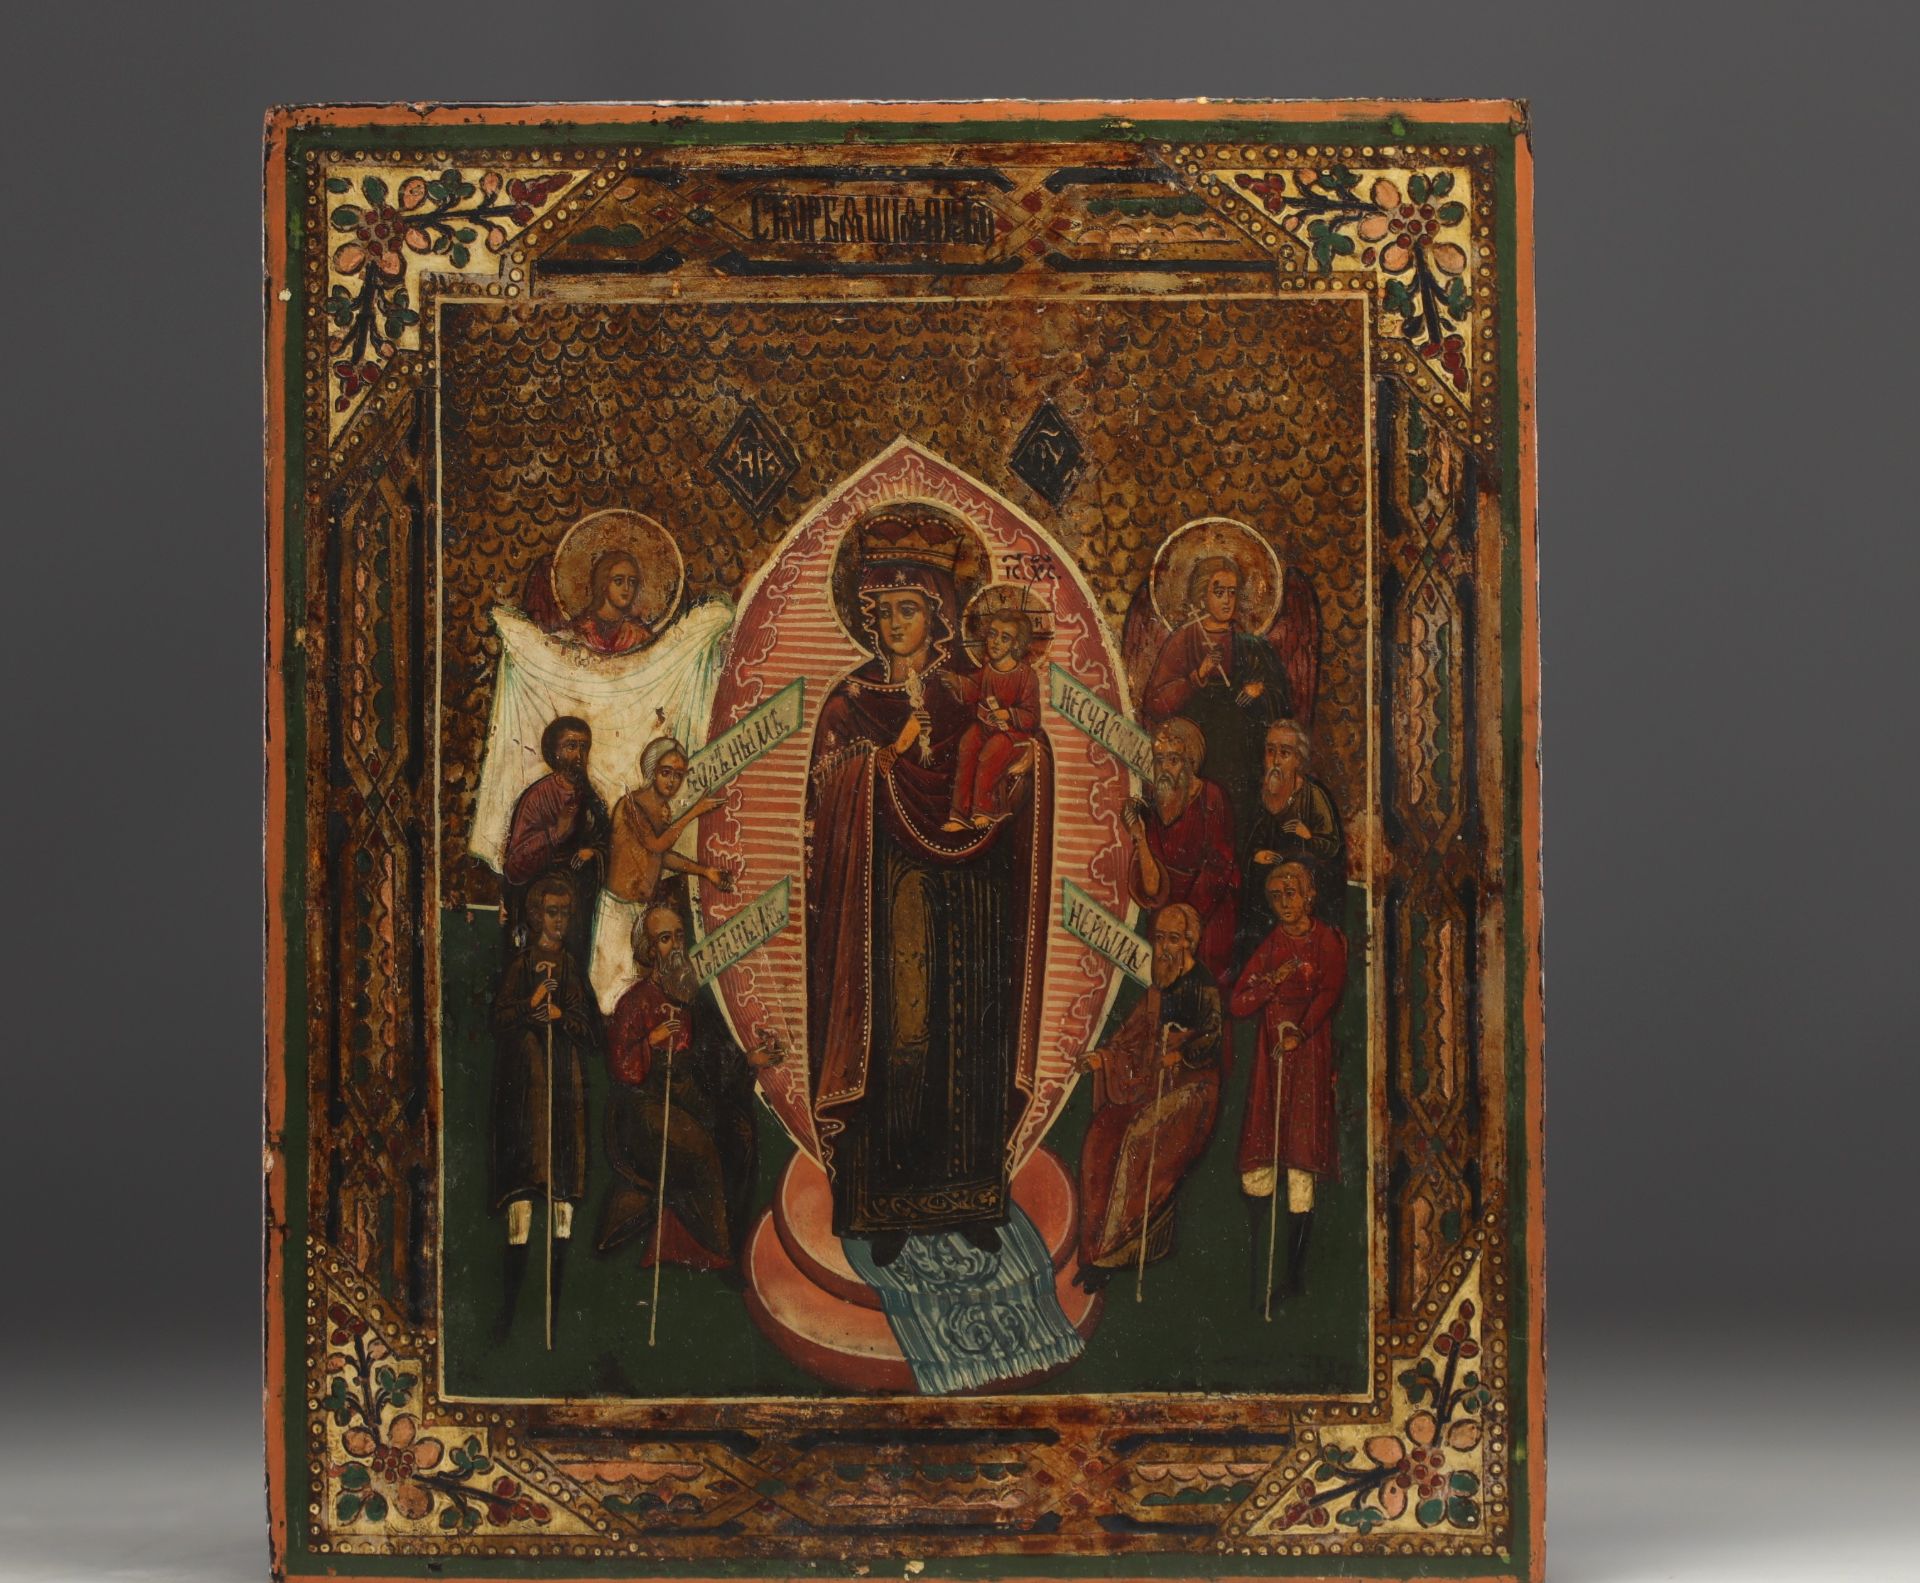 "Holy Mother of God", Joy to the afflicted - Icon on wood, 19th century Russian work.